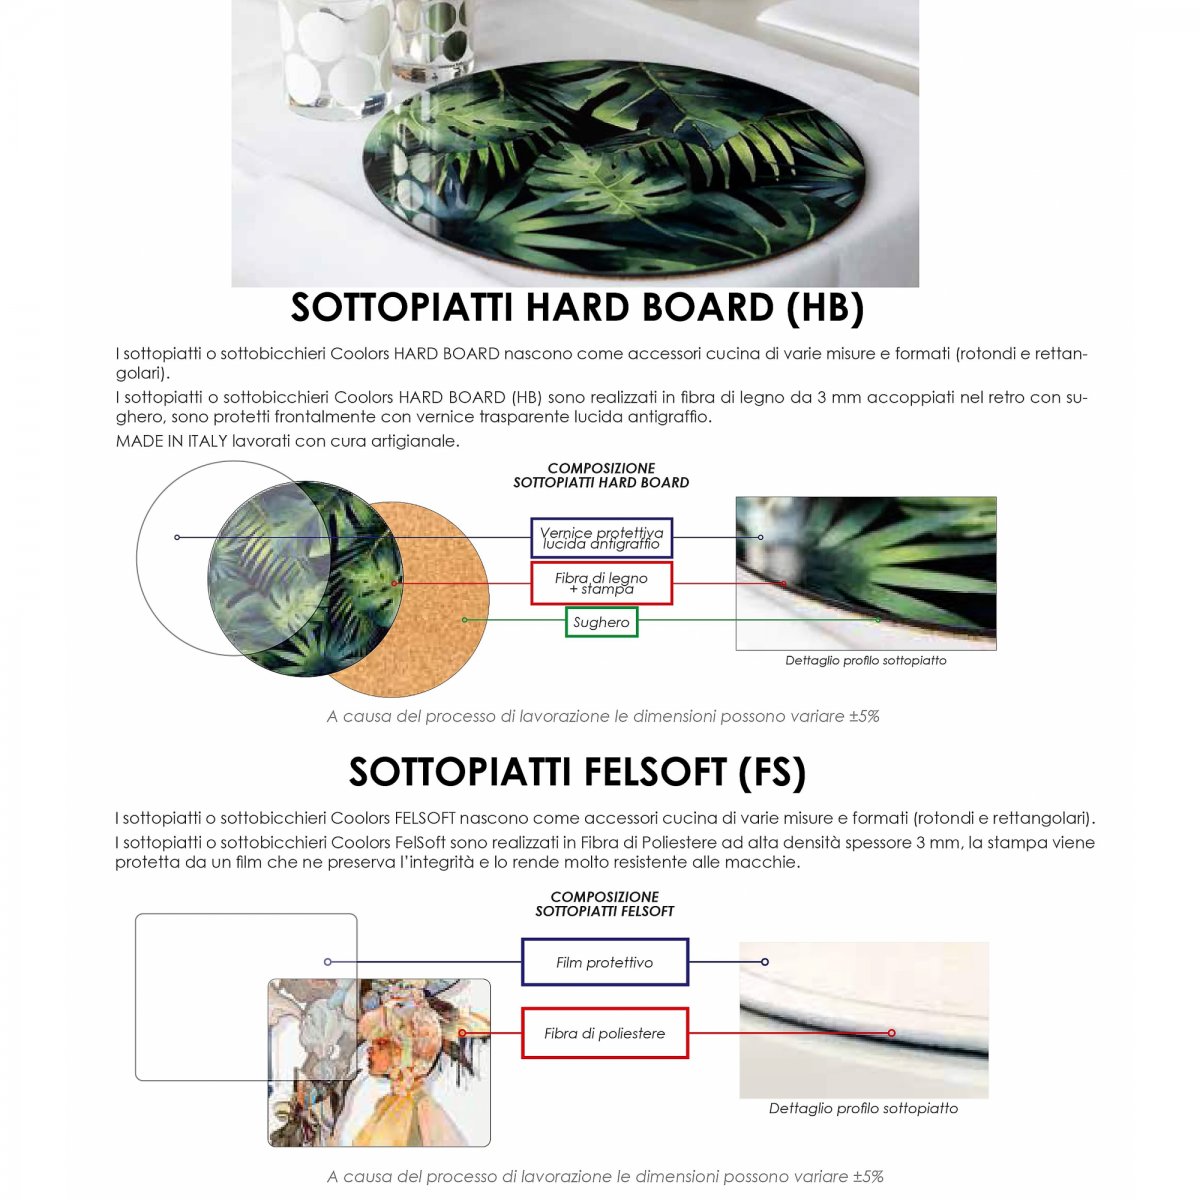 Coolors SOTTOBICCHIERE RETTANGOLARE LUPIN THE 3RD